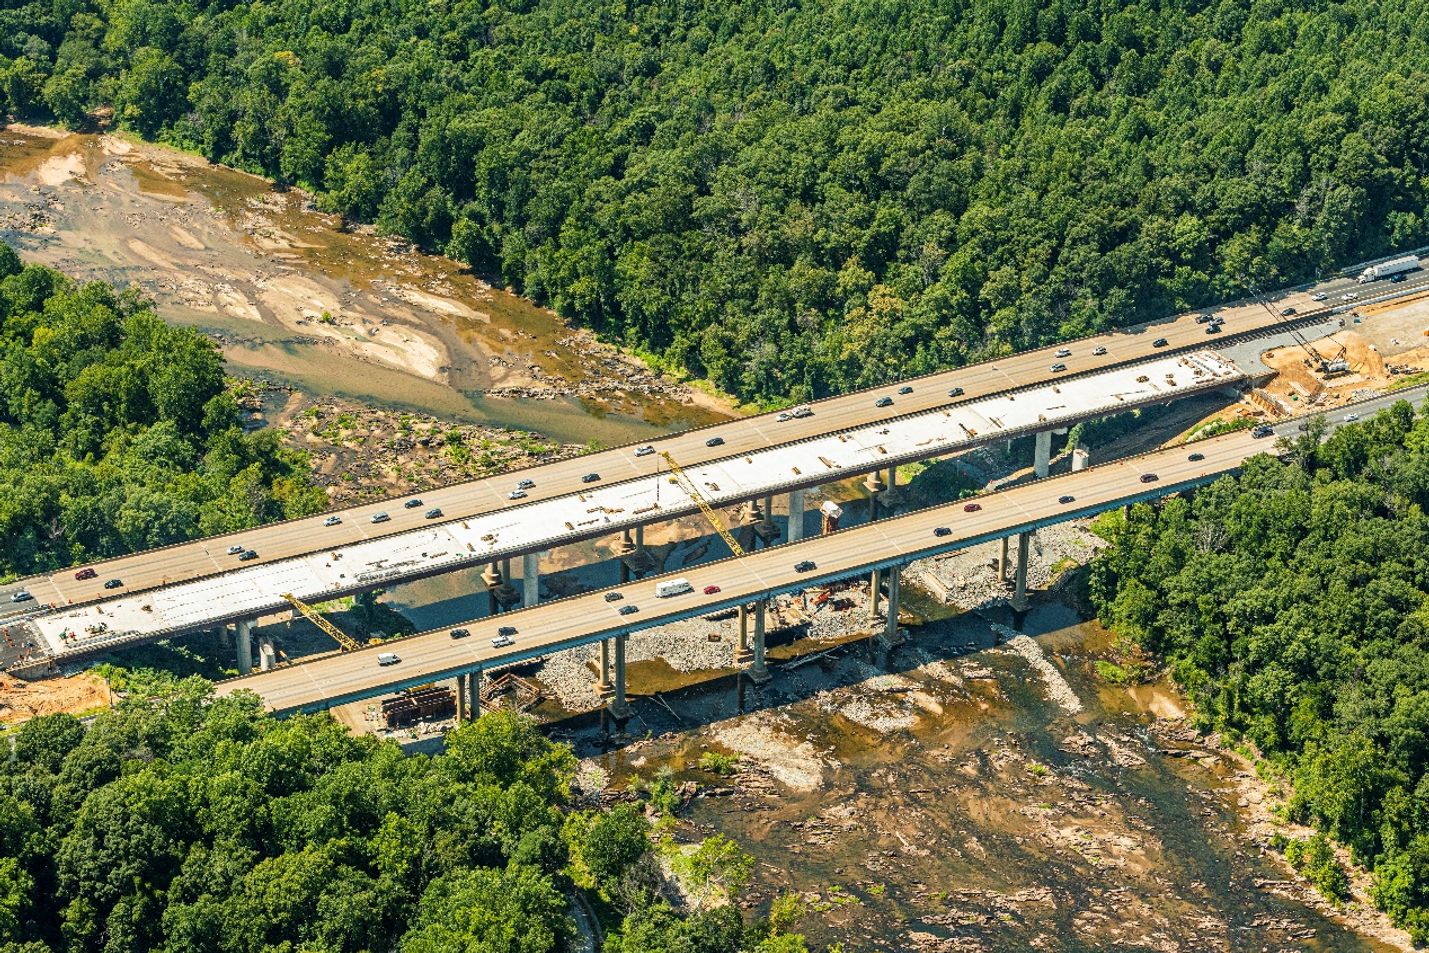 SOUTHBOUND BRIDGE TO OPEN AT THE RAPPAHANNOCK RIVER